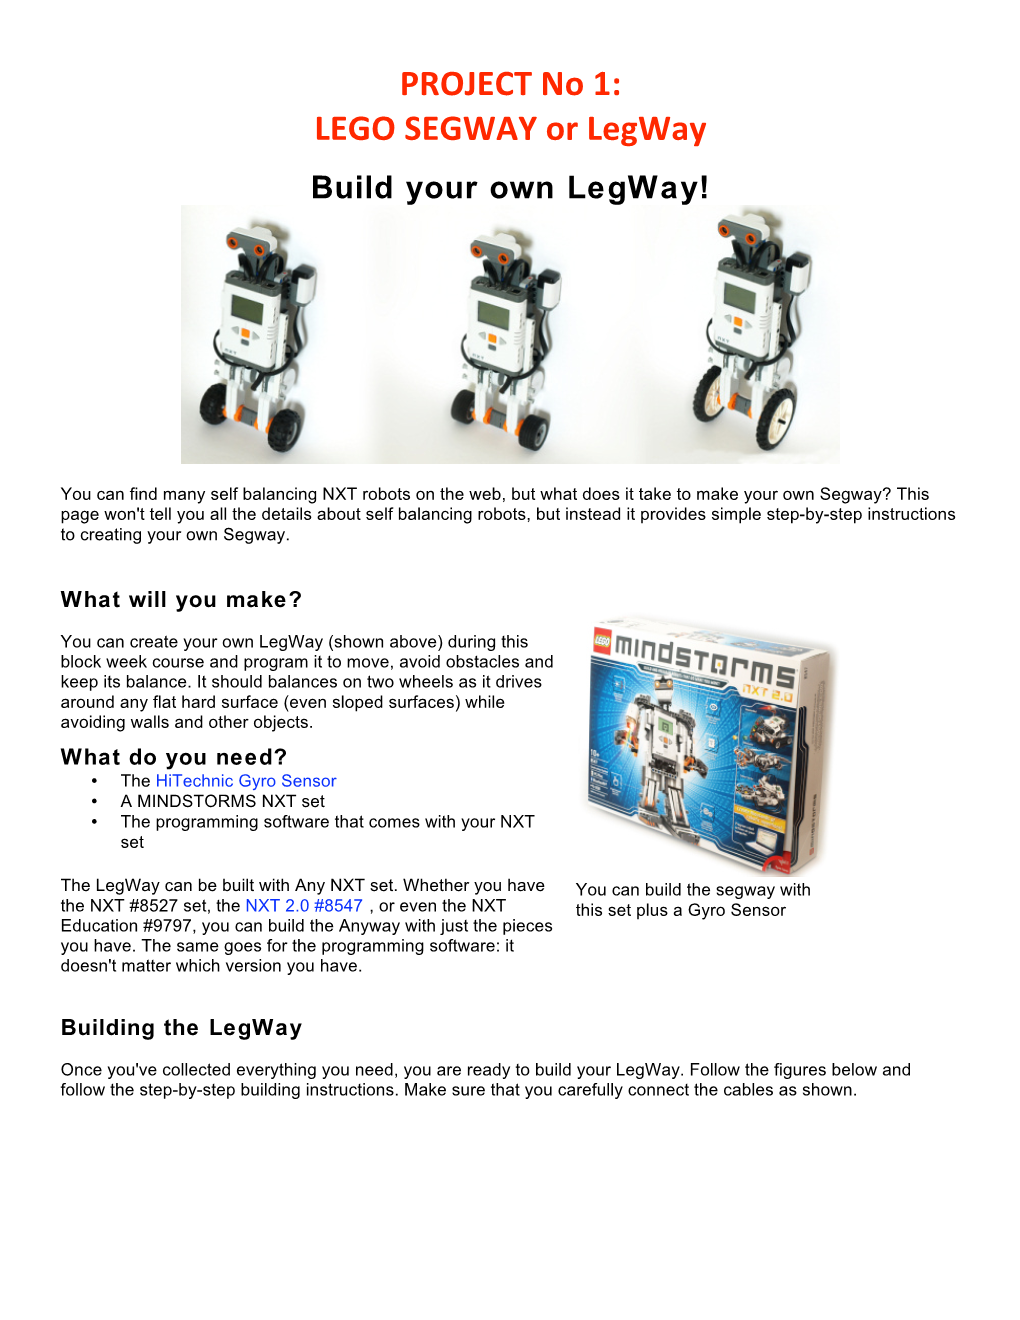 PROJECT No 1: LEGO SEGWAY Or Legway Build Your Own Legway!